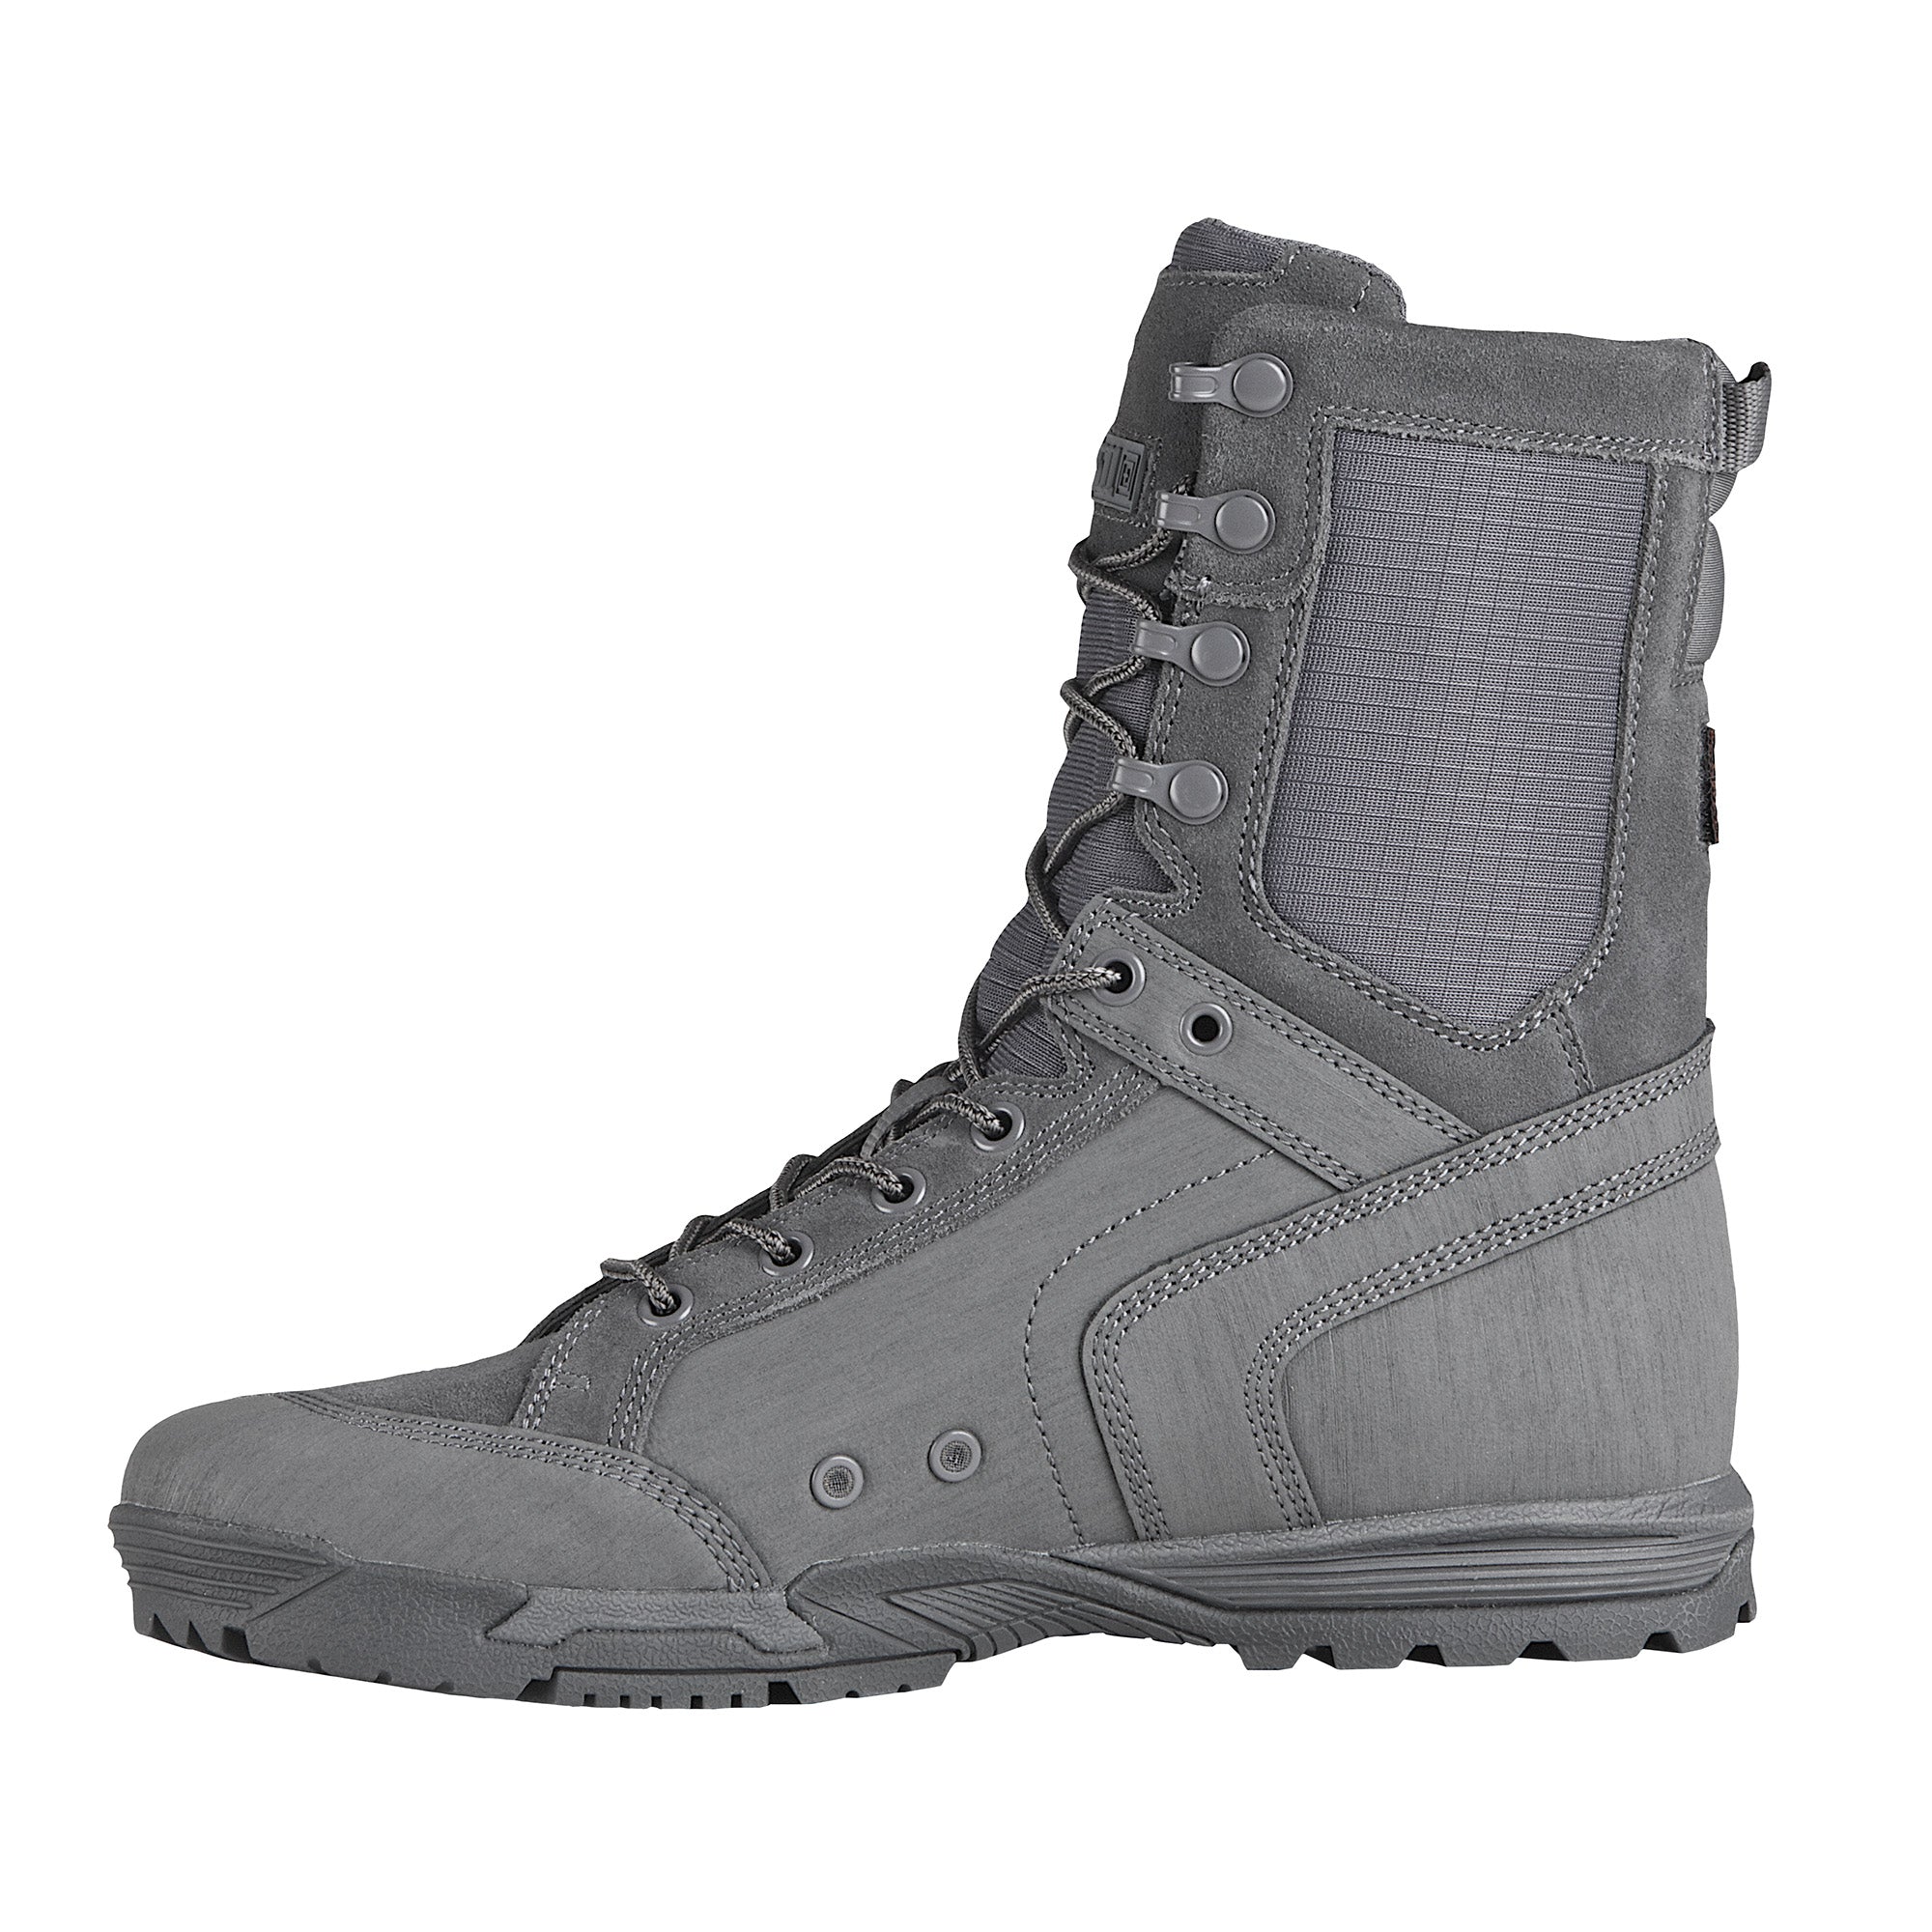 5.11 RECON® Boot – 5.11 Tactical Japan